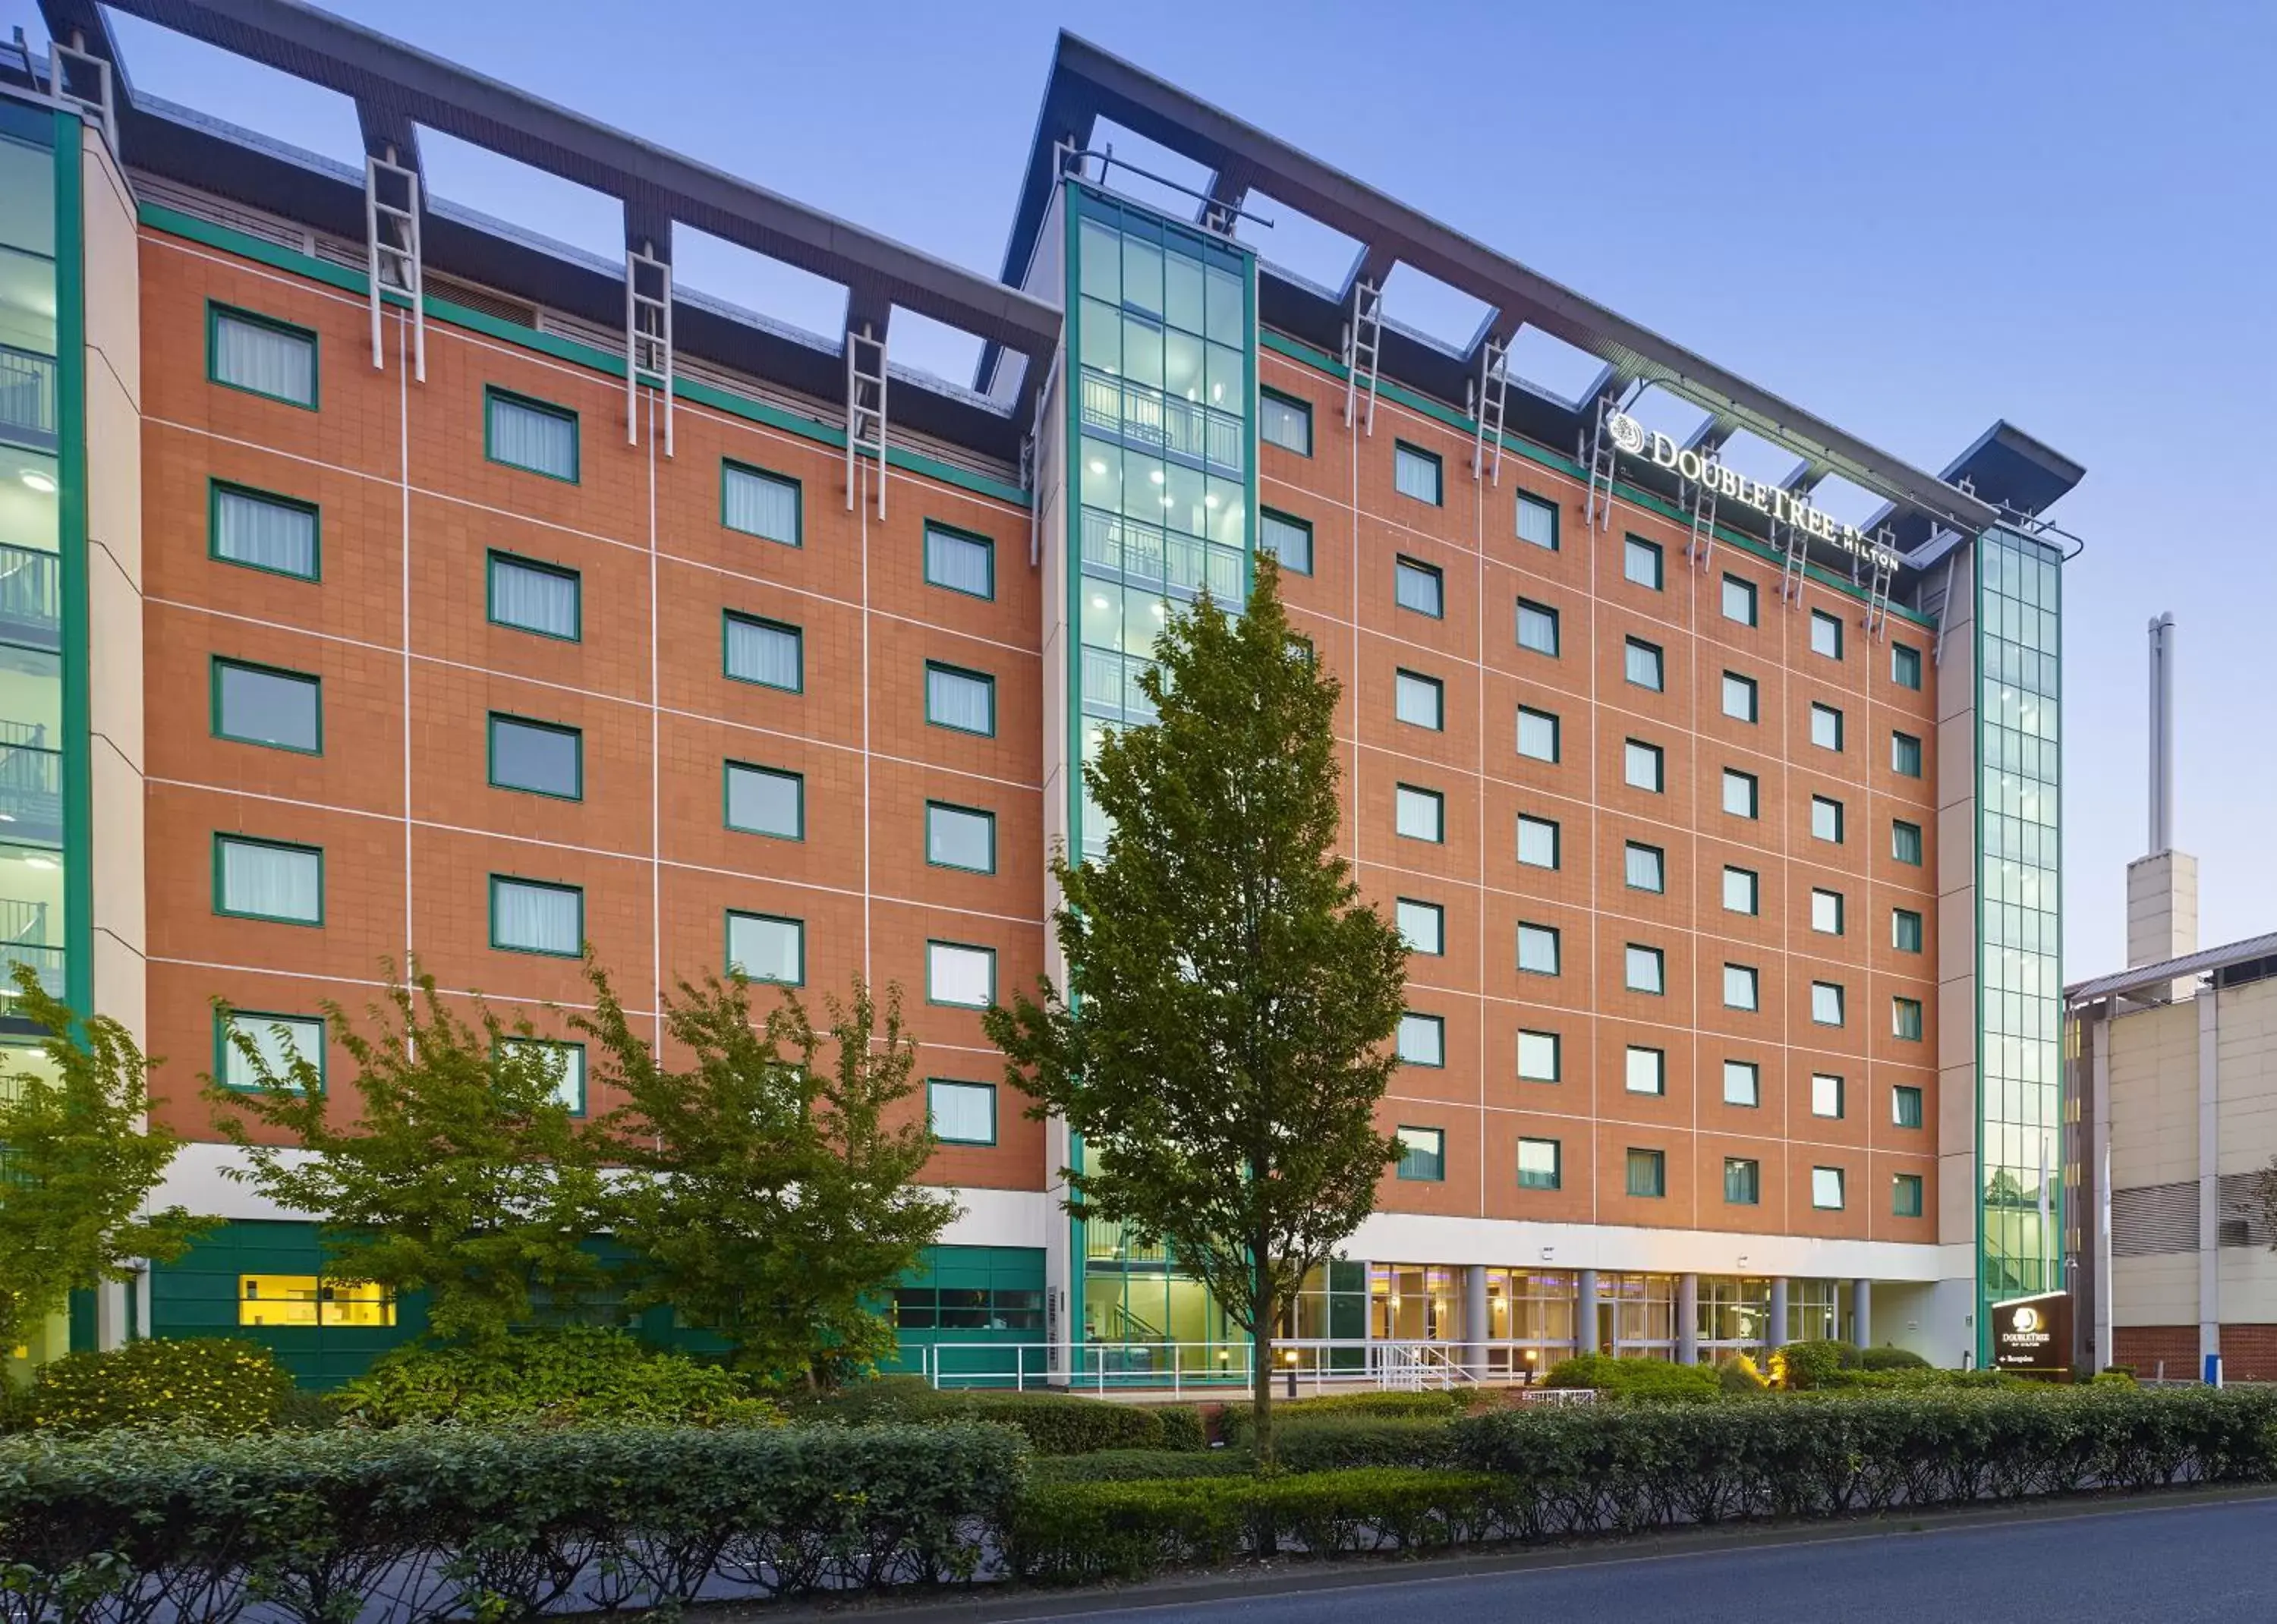 Facade/entrance, Property Building in DoubleTree by Hilton Woking